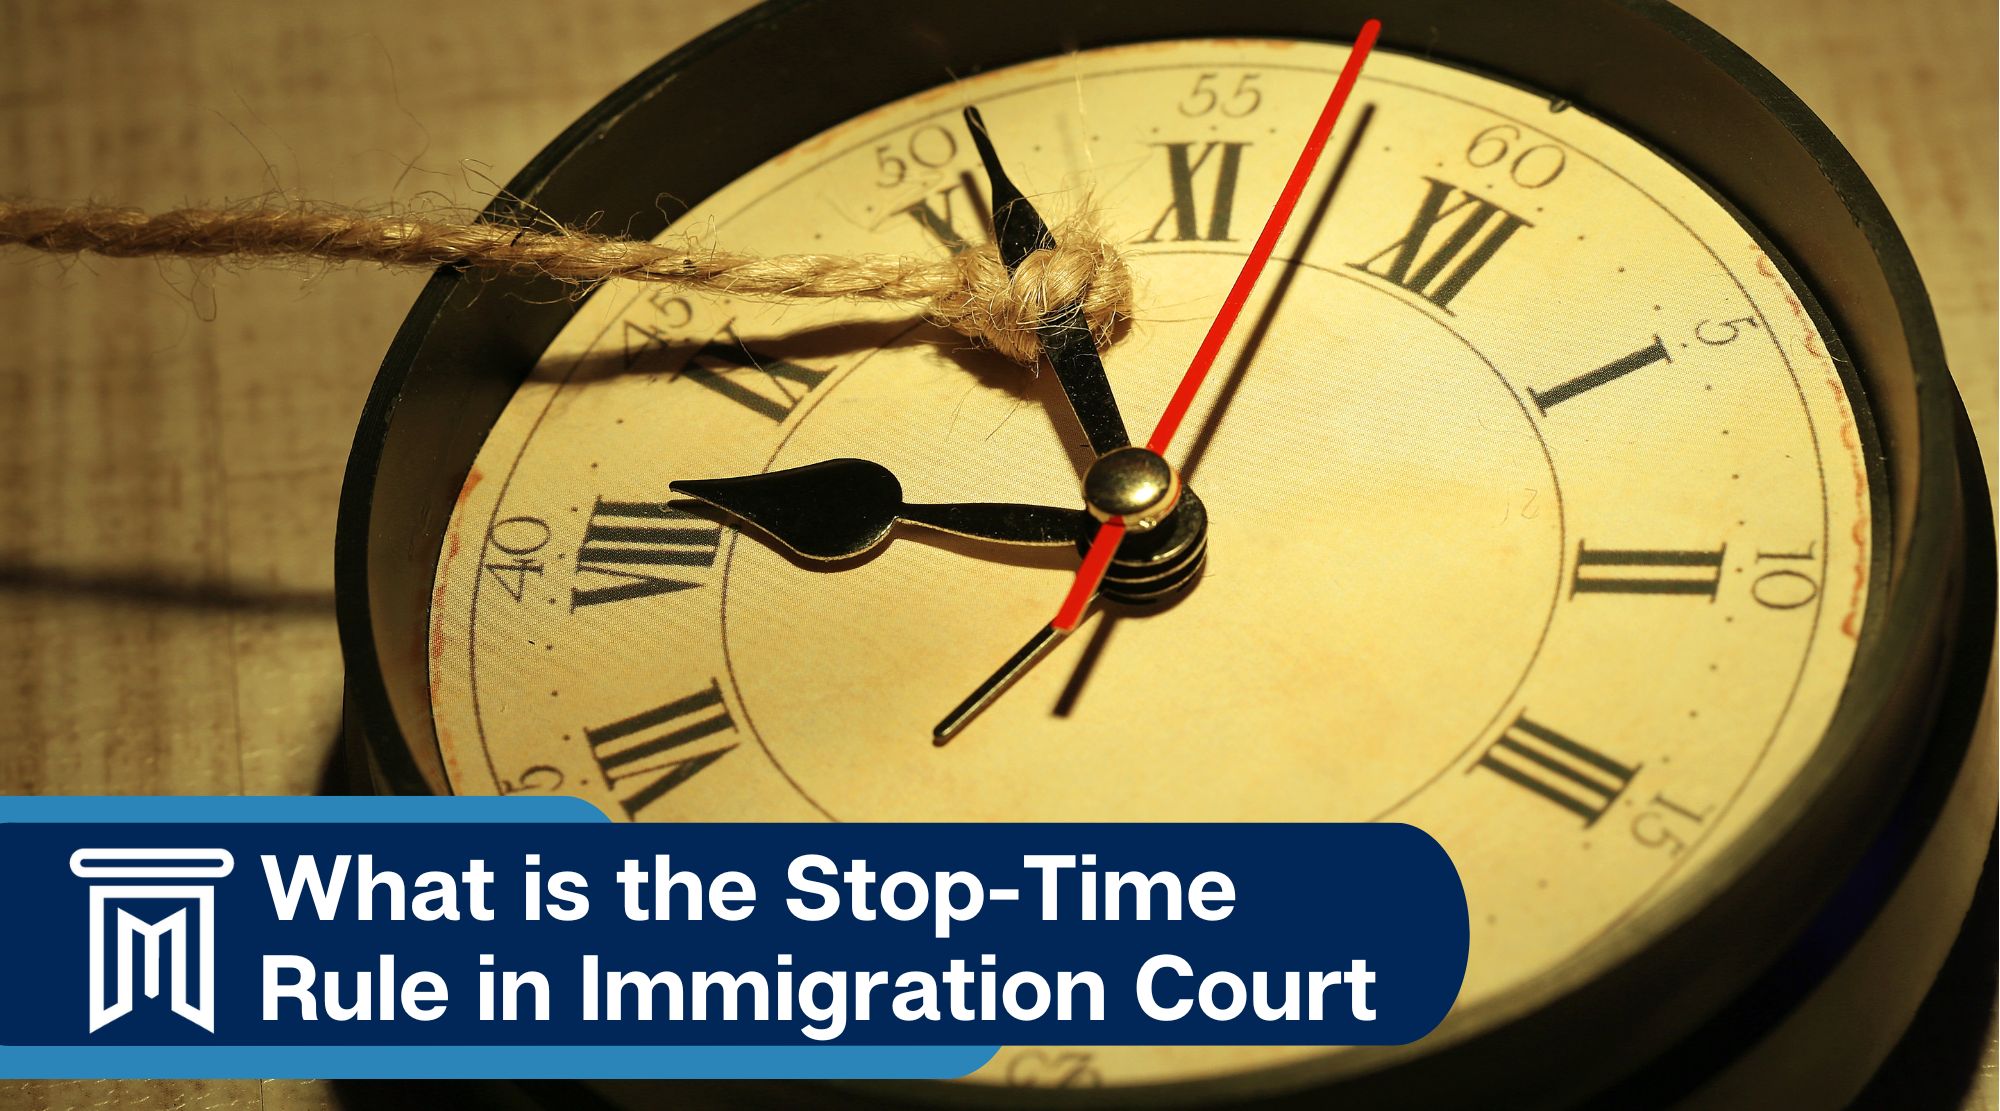 What is the Stop-Time Rule in immigration court